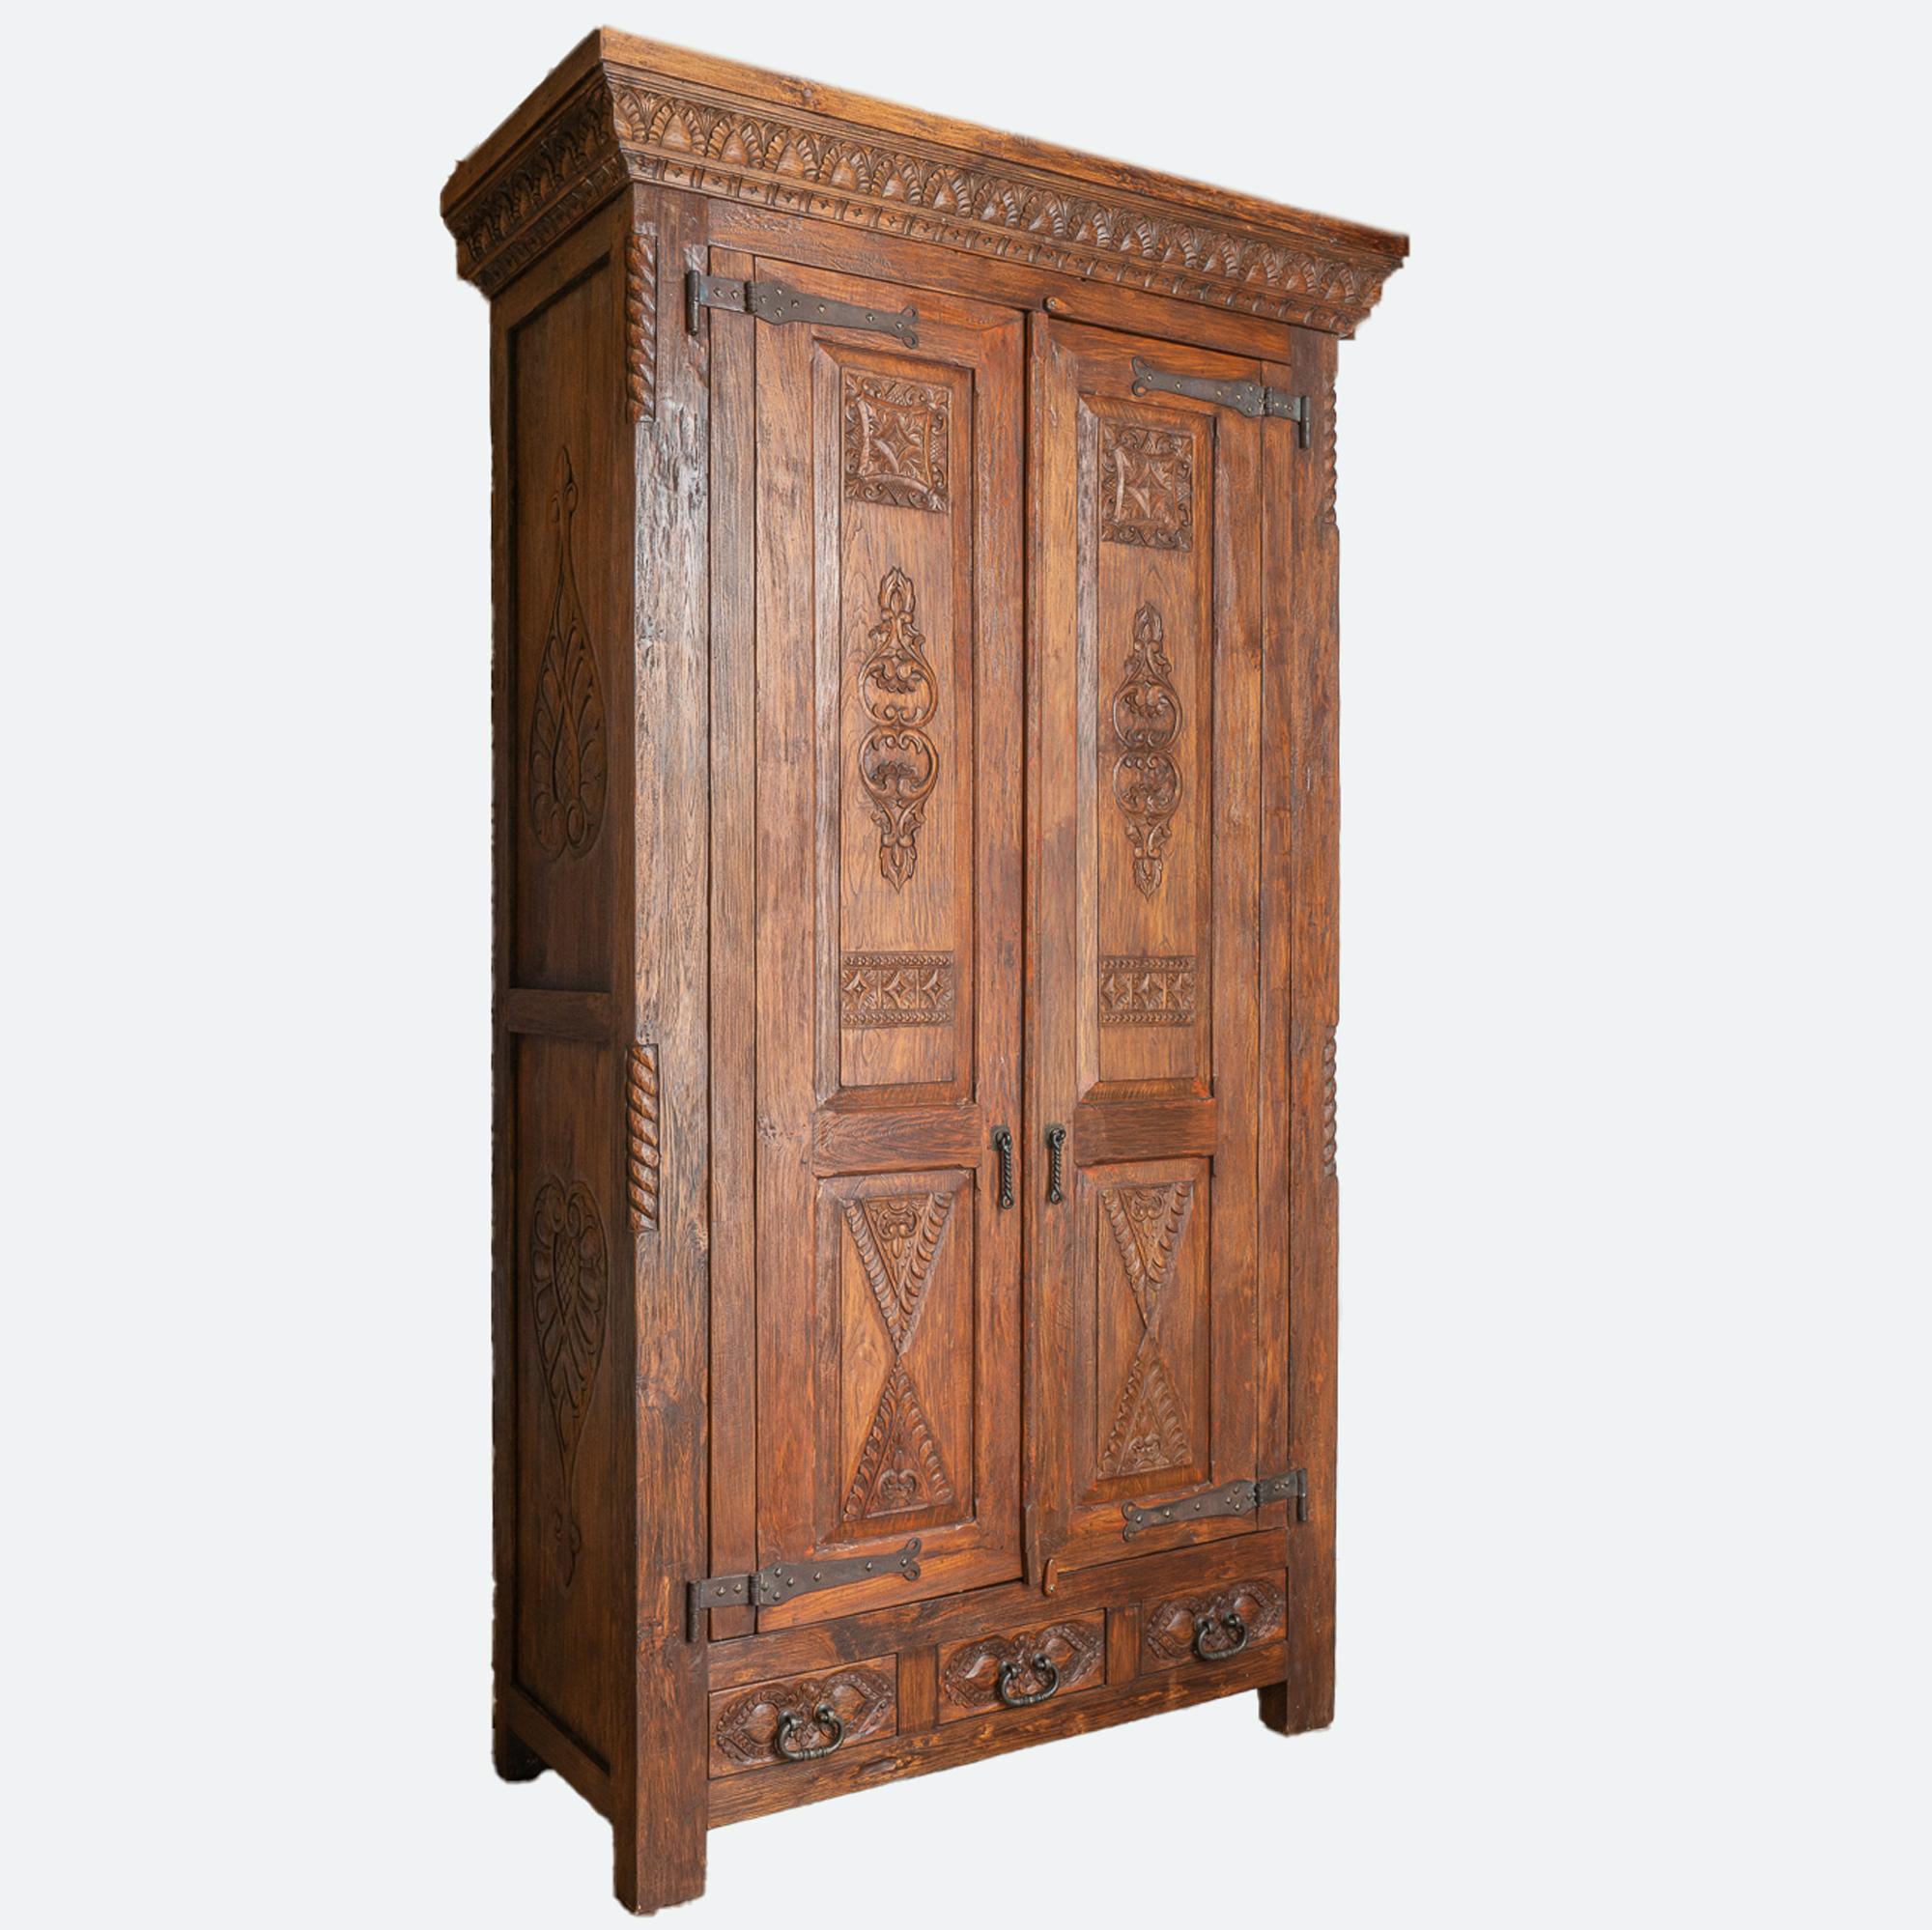 At almost 10' tall, this dark oak armoire makes a dramatic statement while providing great storage in the spacious interior with three shelves.
The beautiful carved details are accented with iron studs, pulls and heavy hinges all add to the